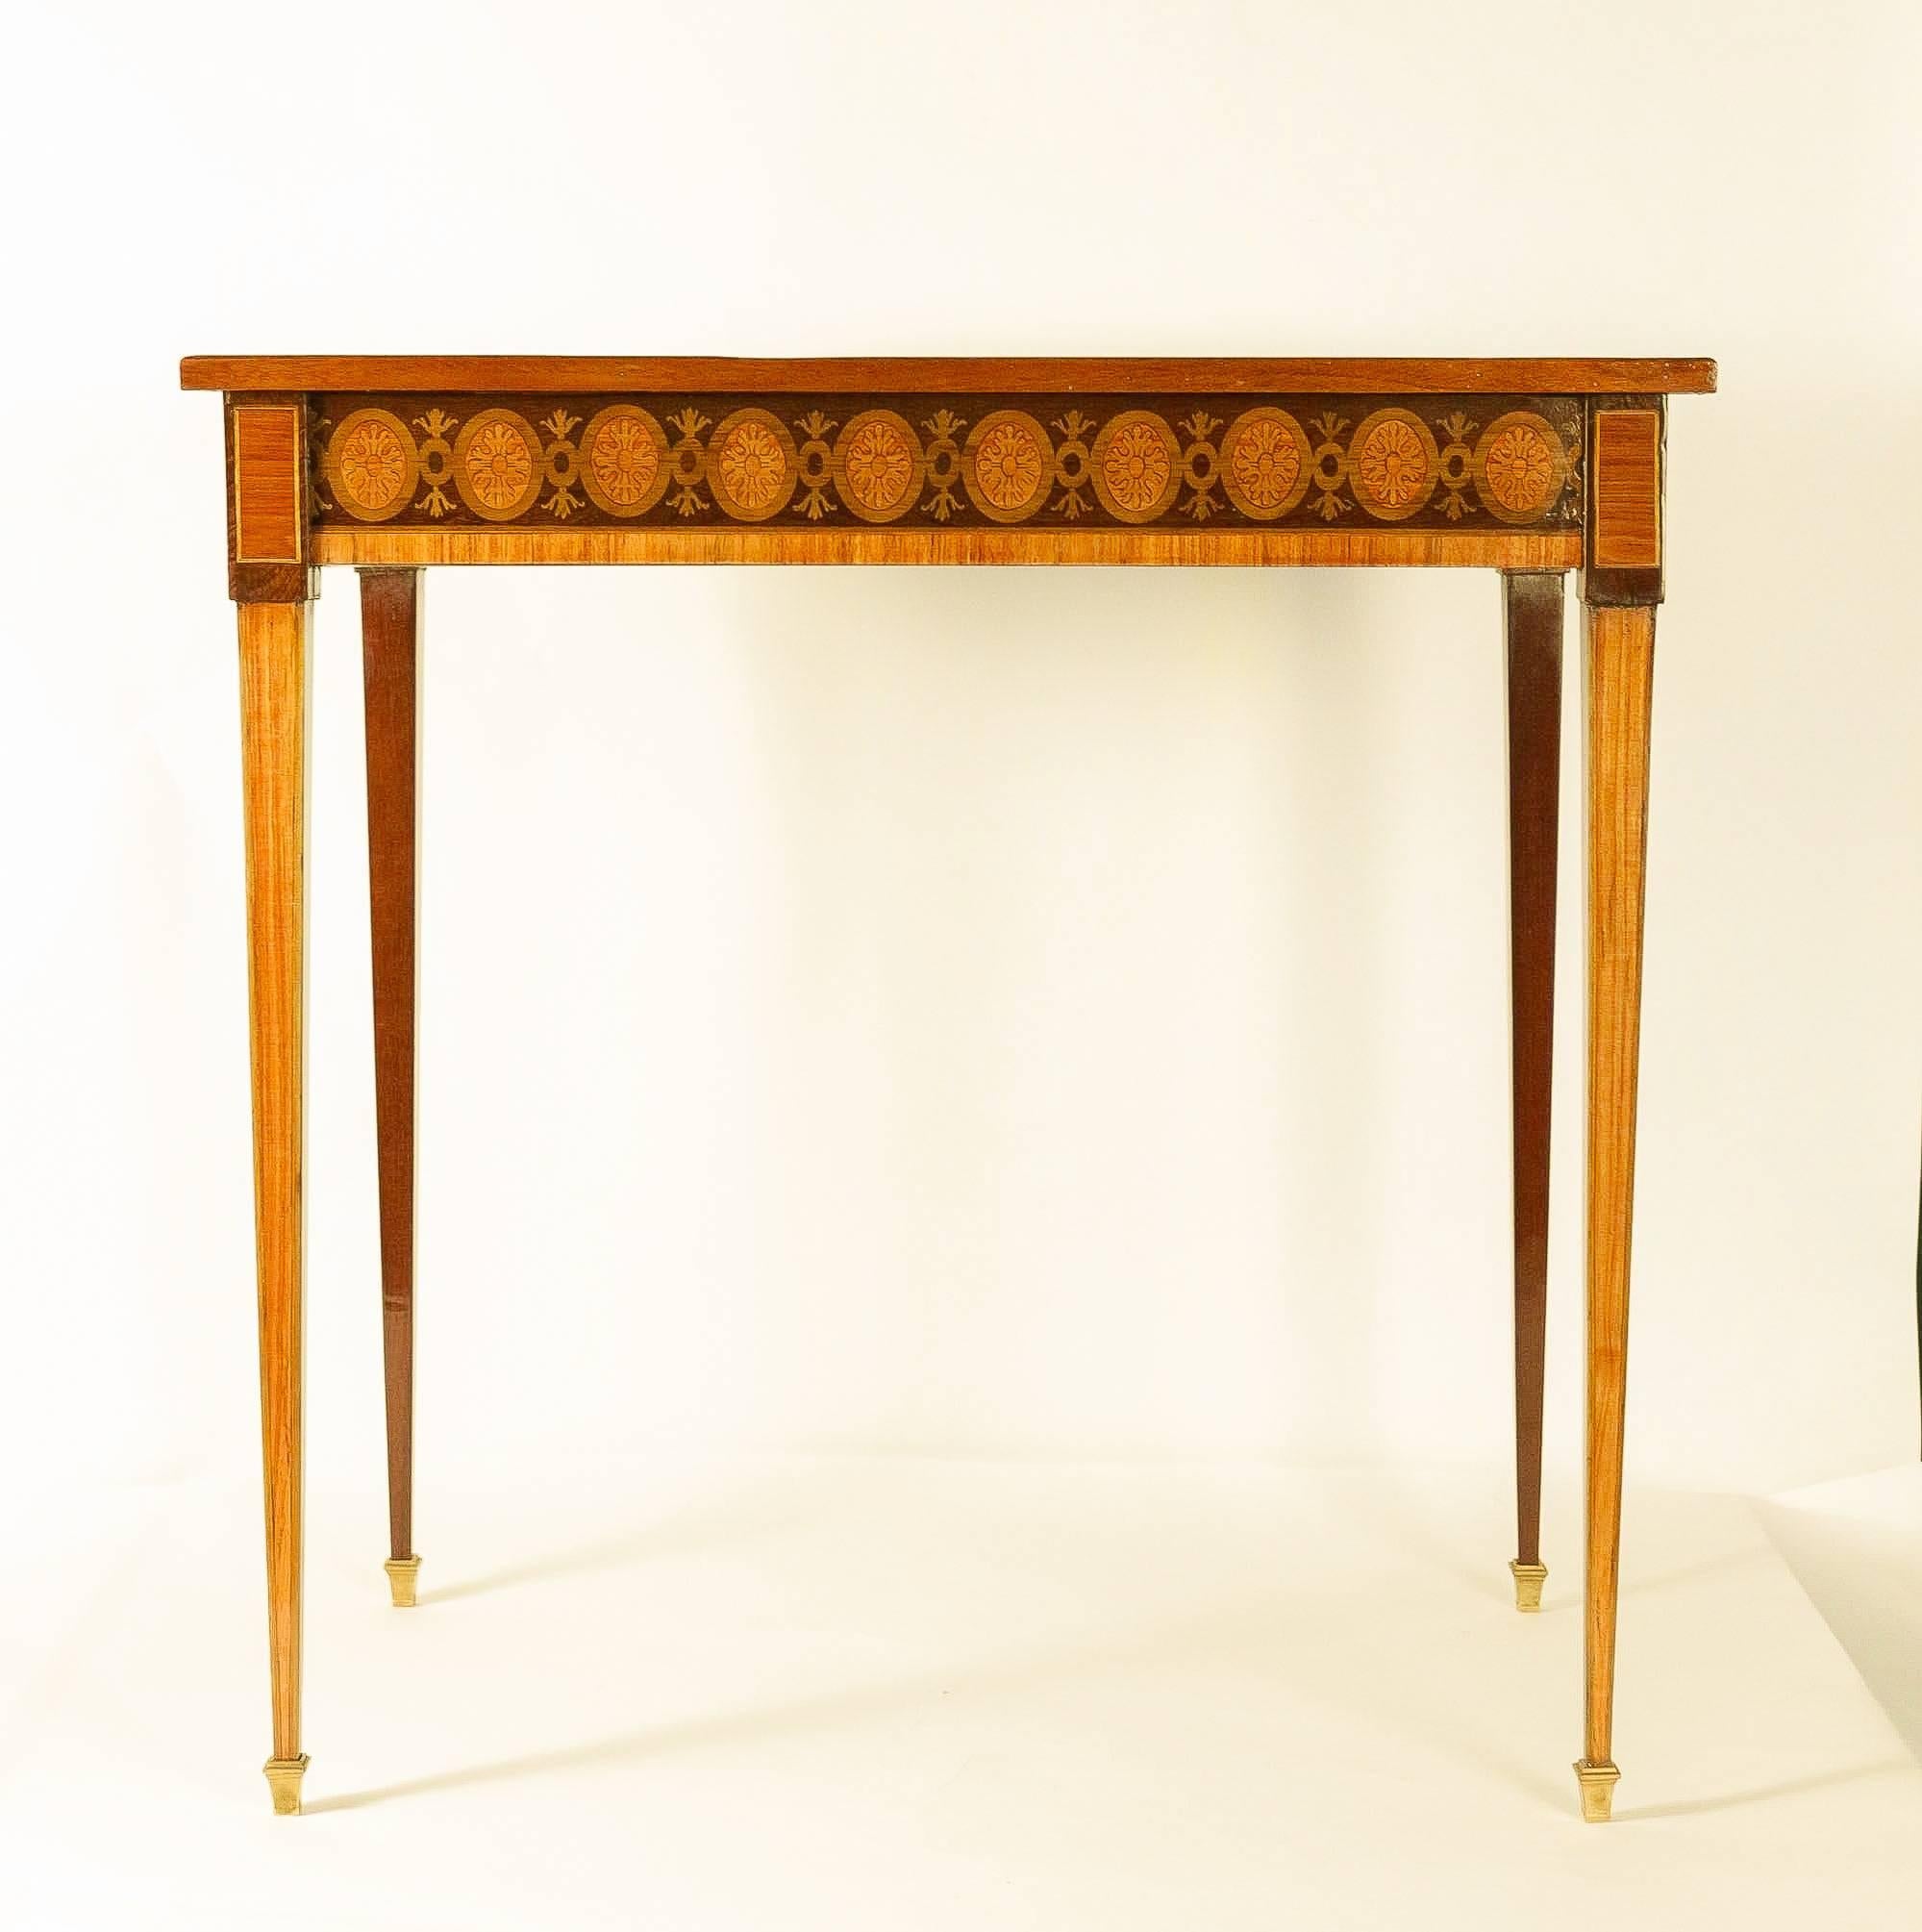 A superb and very unique late 18th century French Directoire period rosewood, kingwood, sycamore, boxwood and walnut 